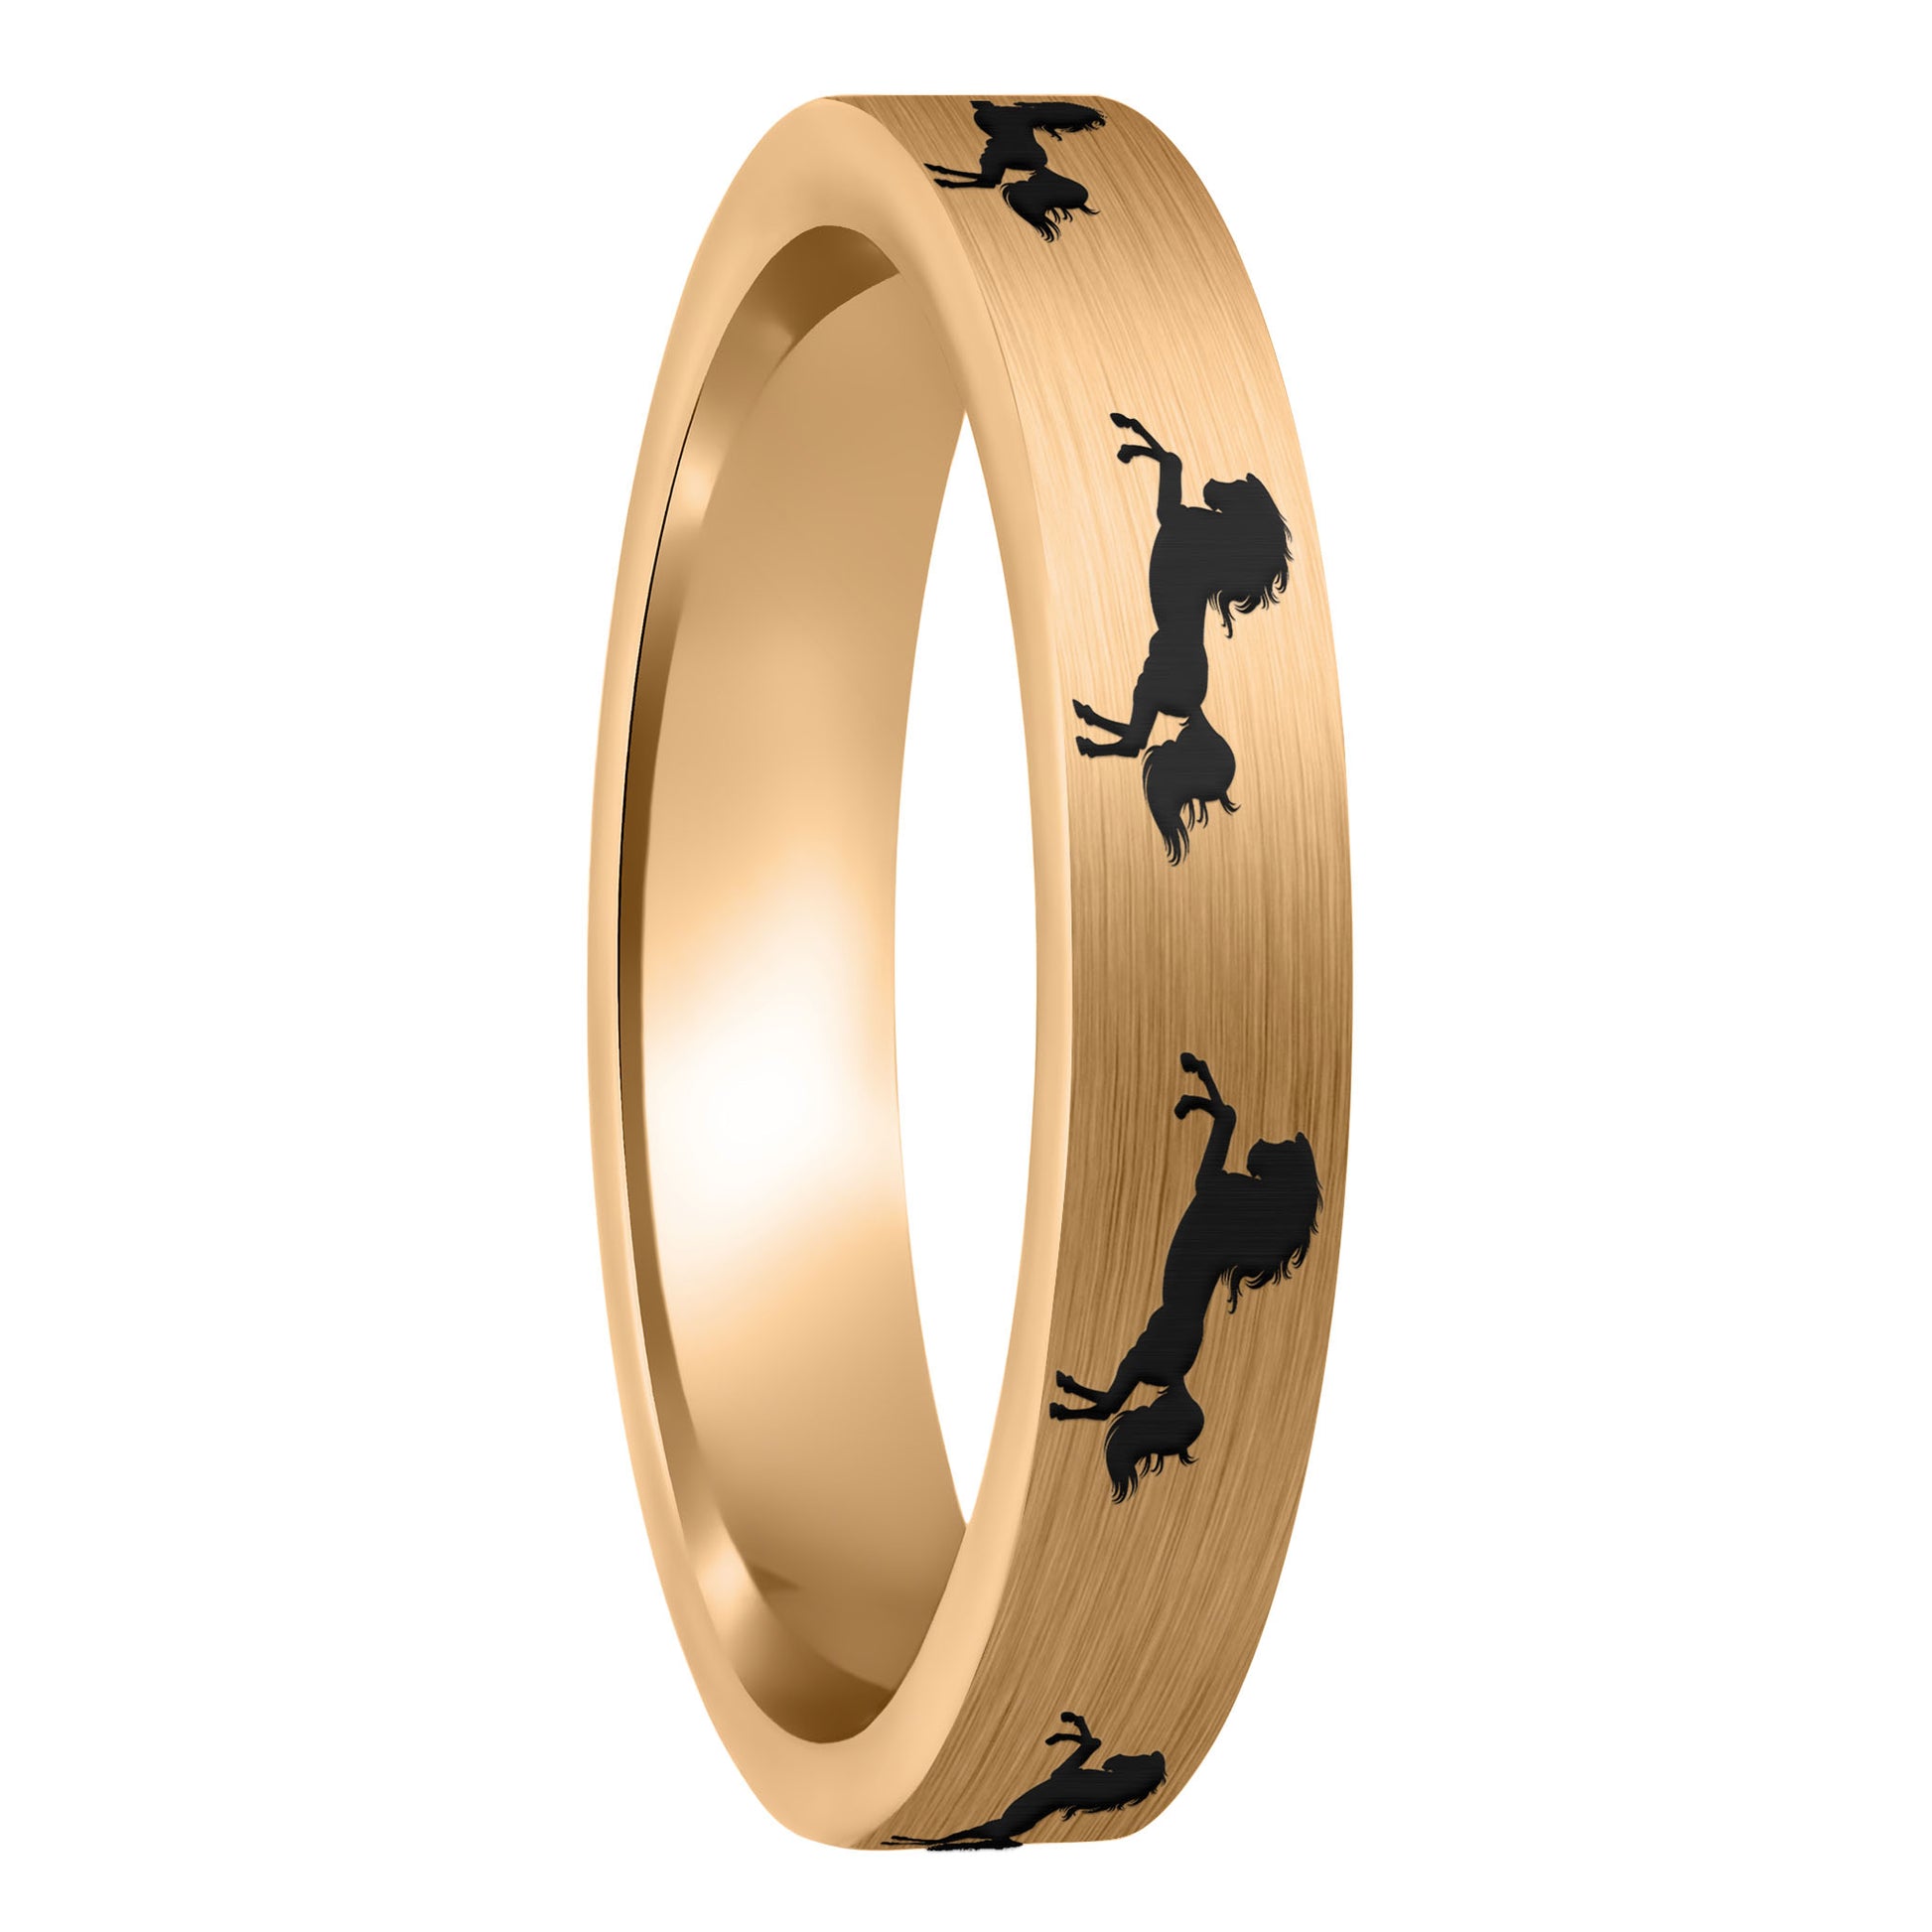 A rearing horse brushed rose gold tungsten women's wedding band displayed on a plain white background.